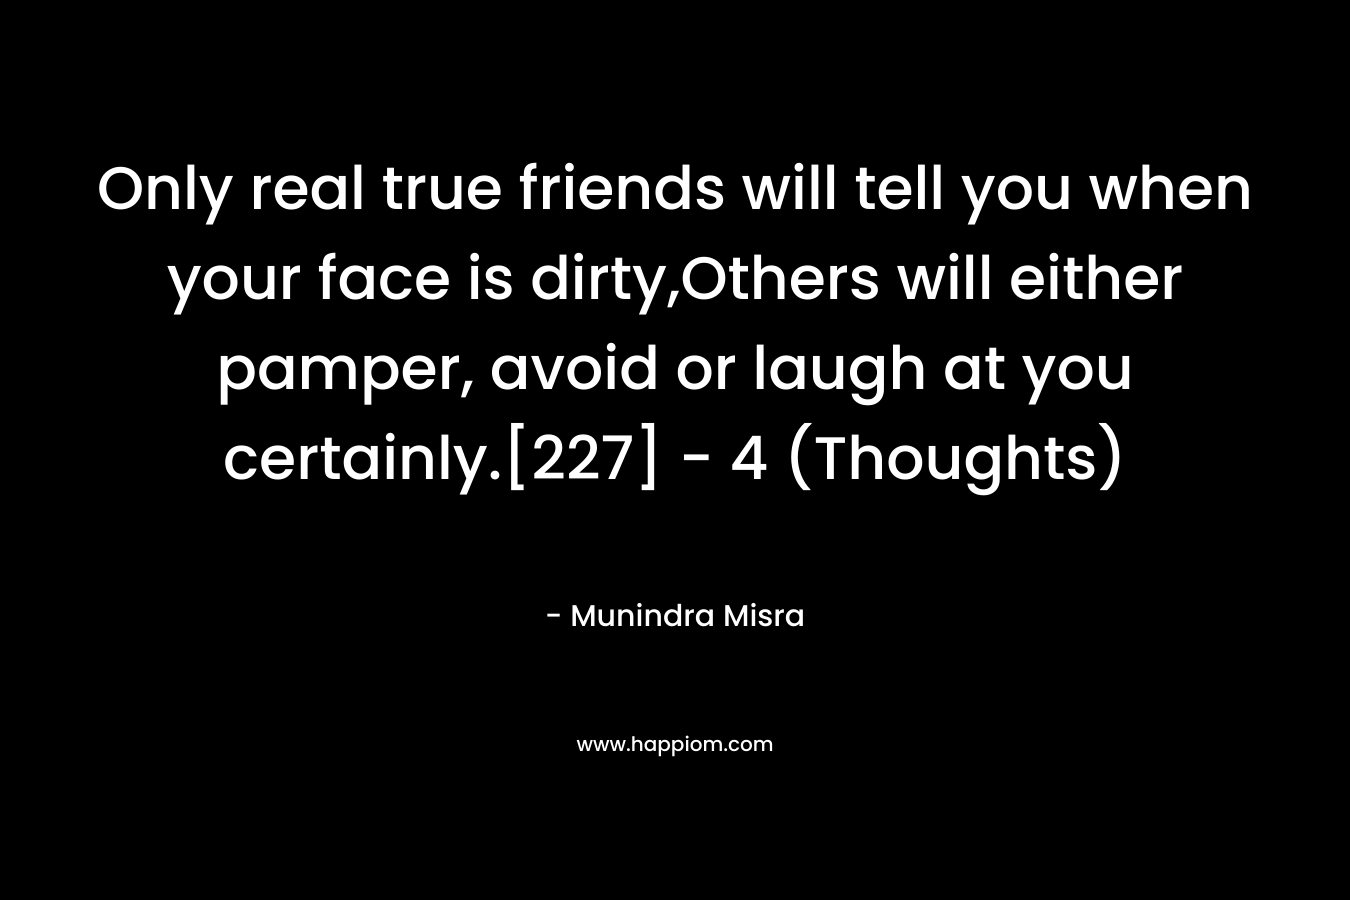 Only real true friends will tell you when your face is dirty,Others will either pamper, avoid or laugh at you certainly.[227]	- 4 (Thoughts)